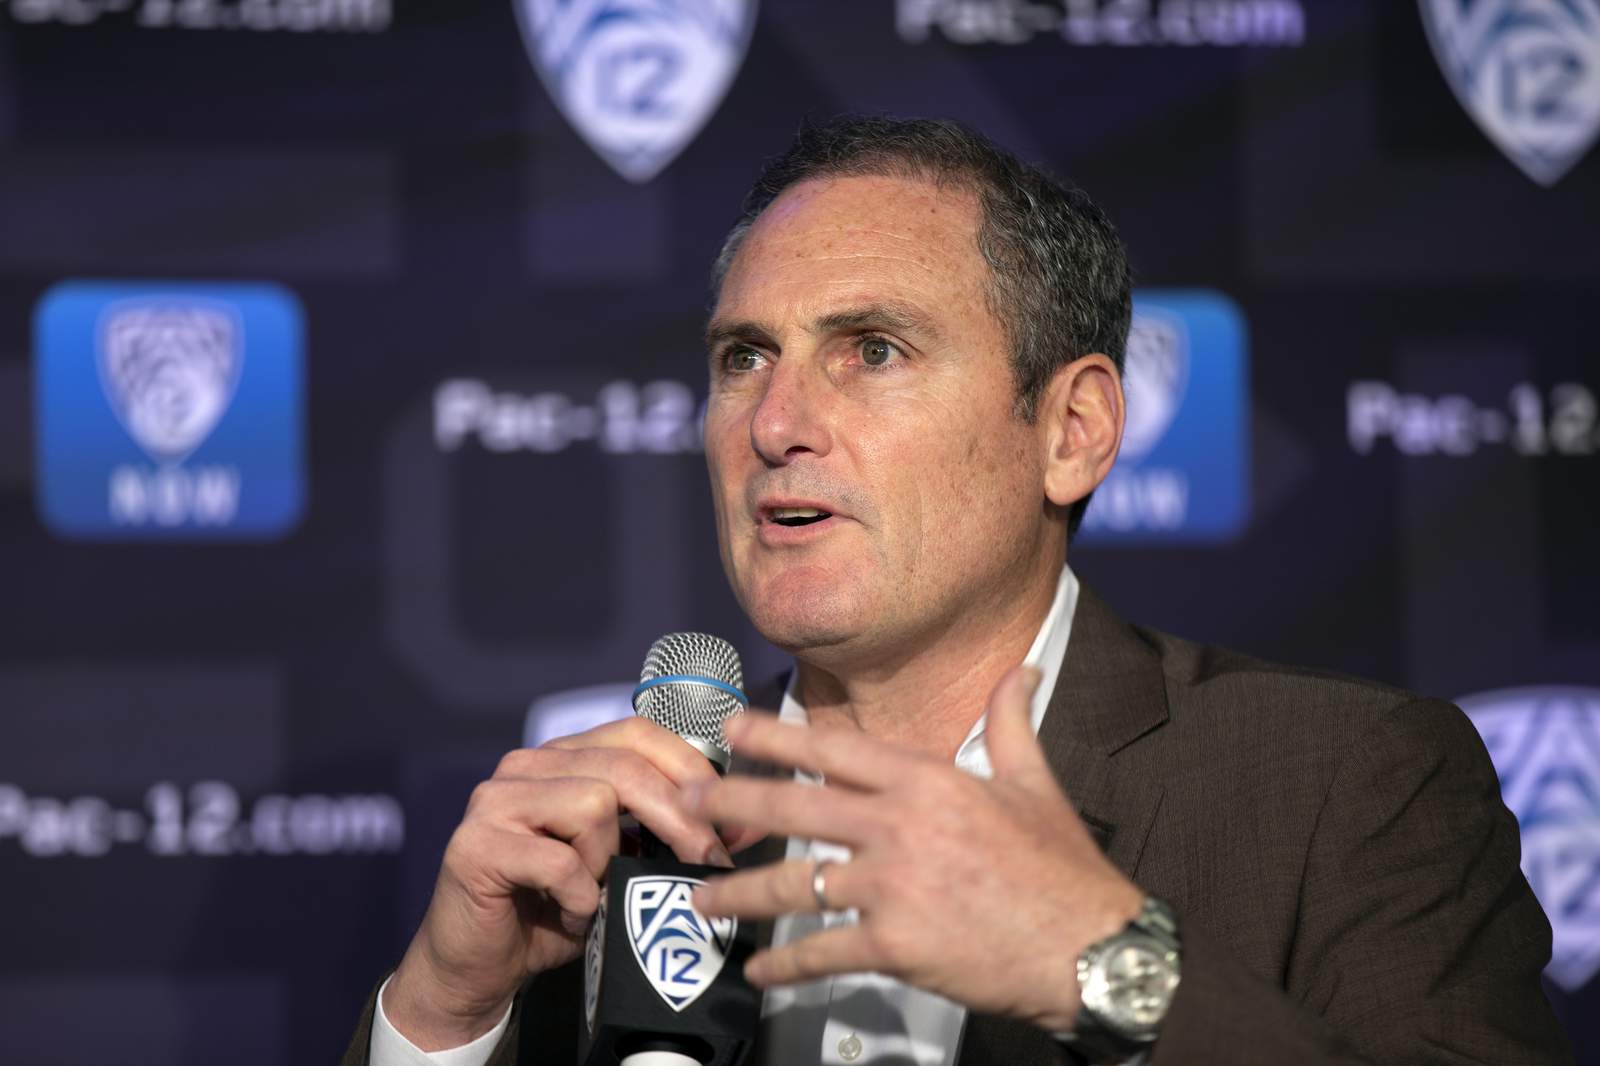 Pac-12 Commissioner Larry Scott stepping down at end of June